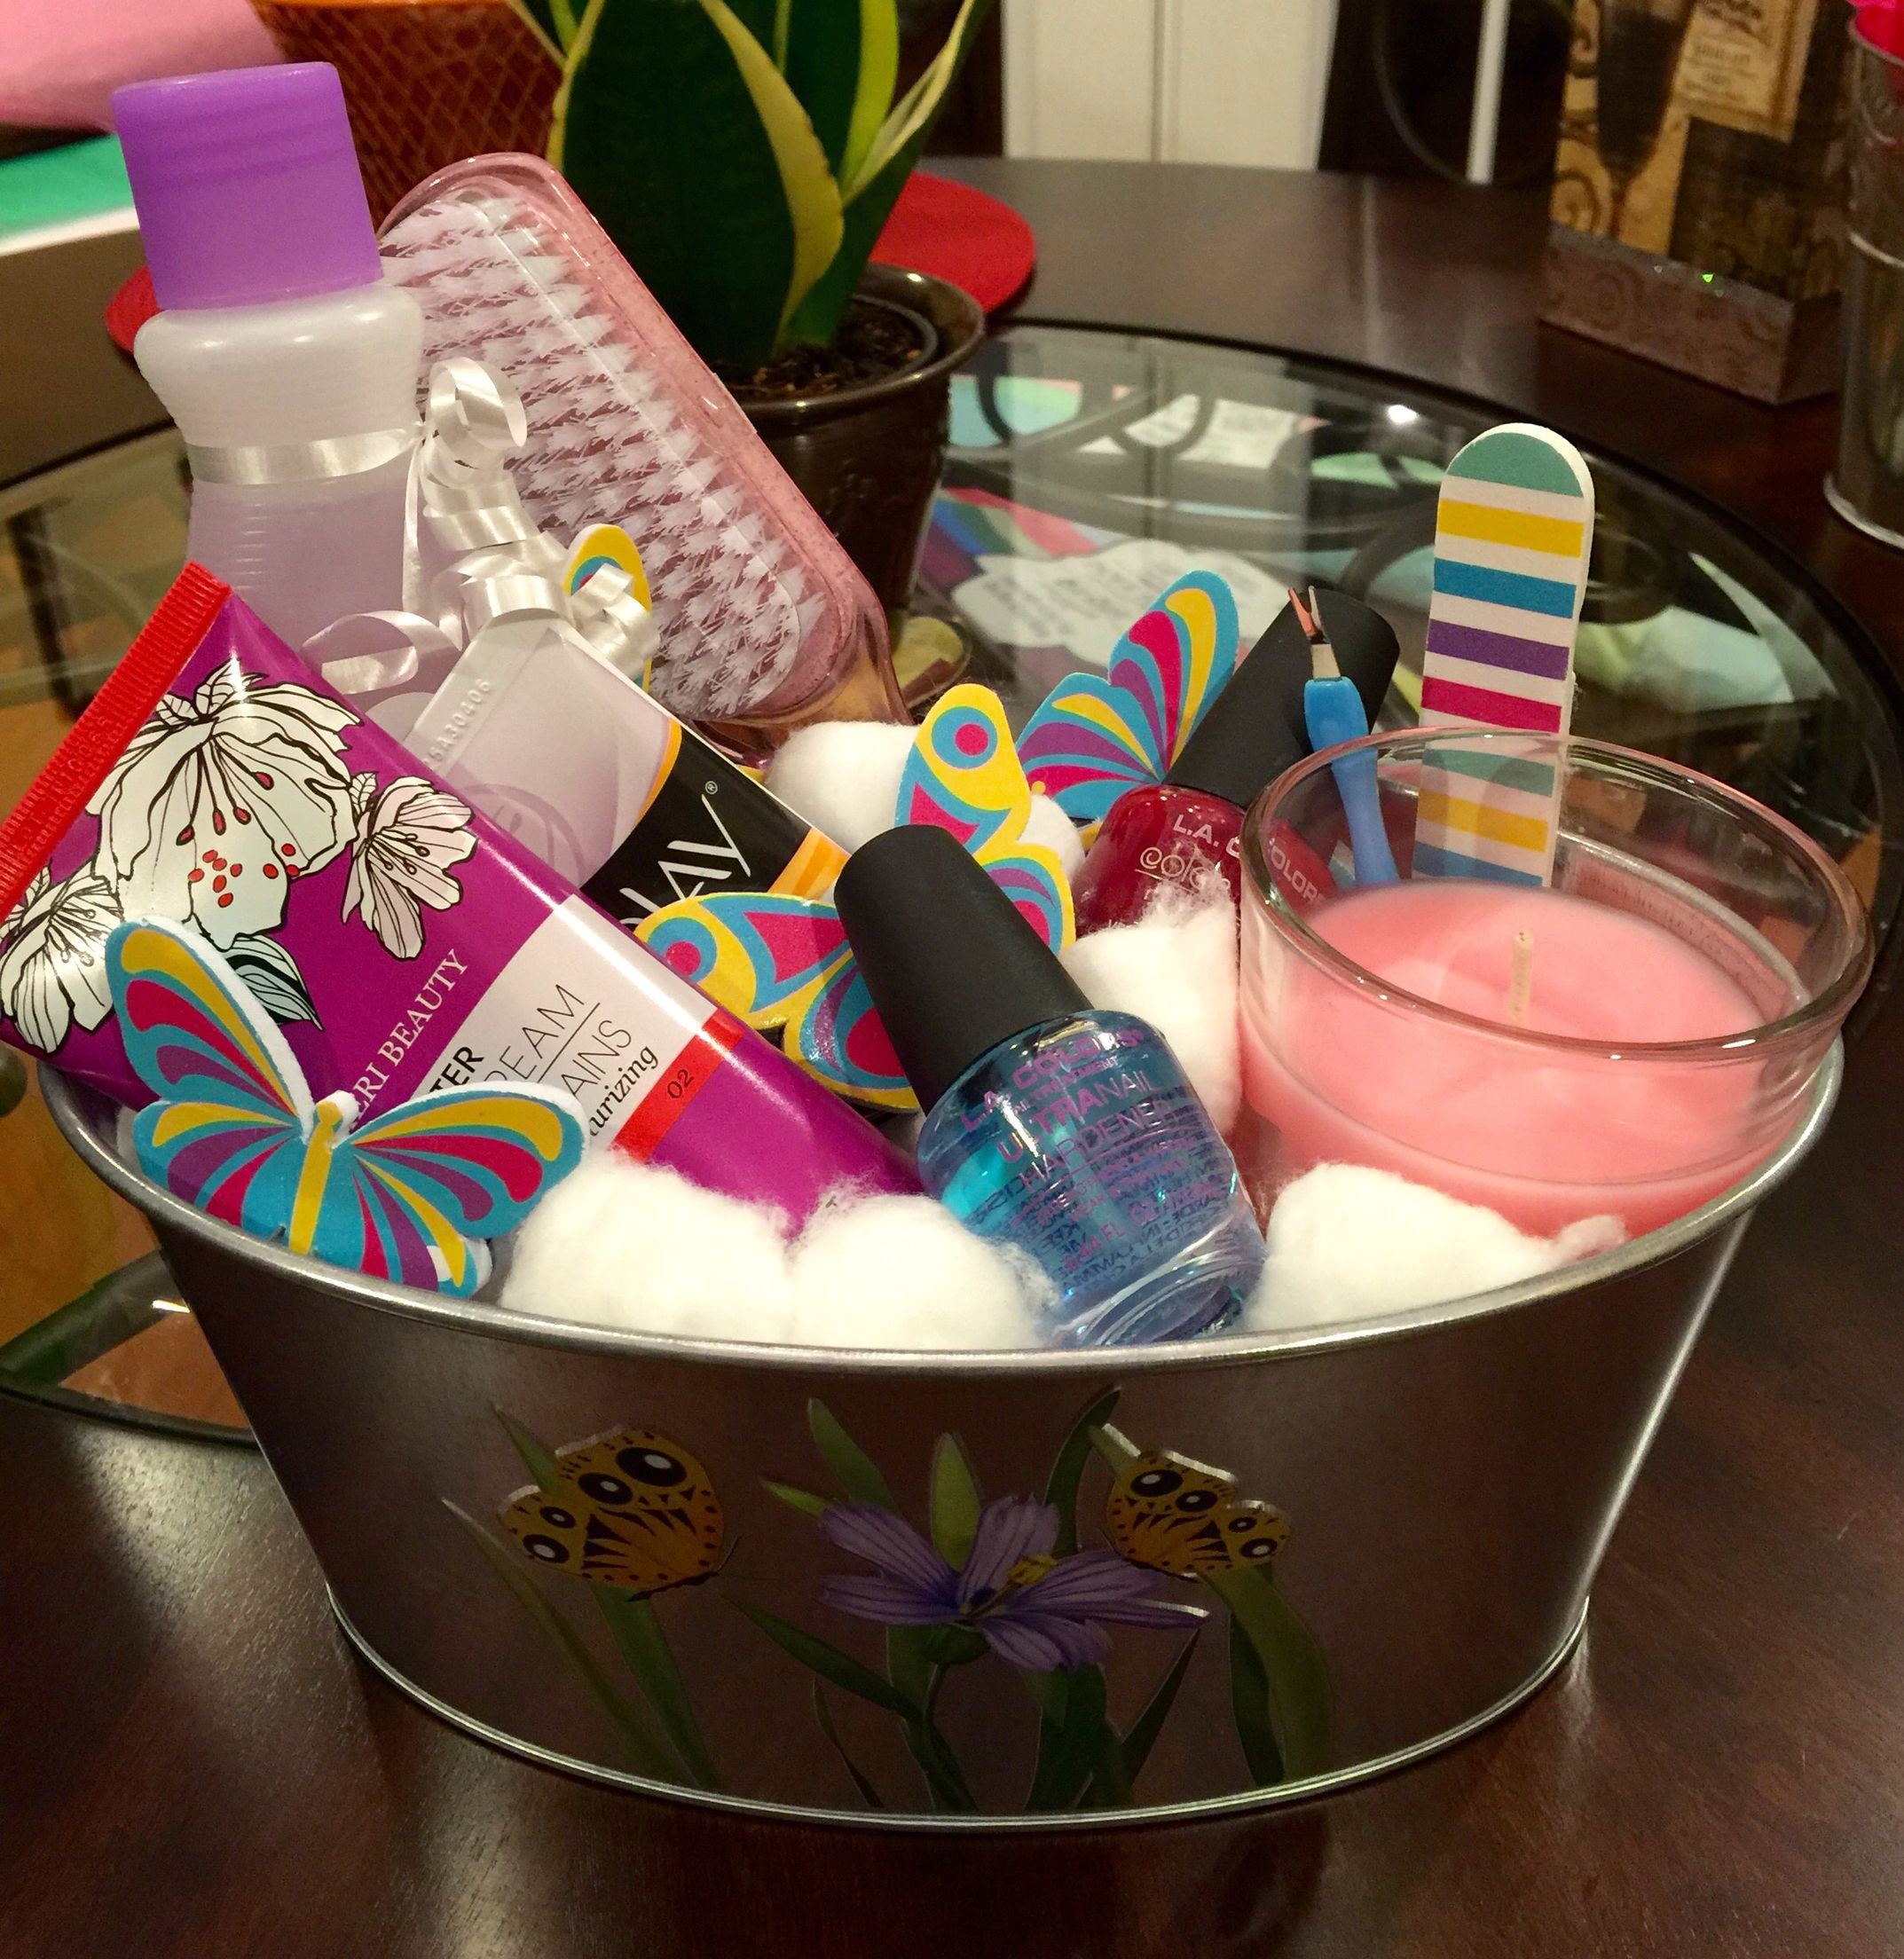 Dollar Tree Gift Basket Ideas
 Nail spa t basket made by yours truly All items from